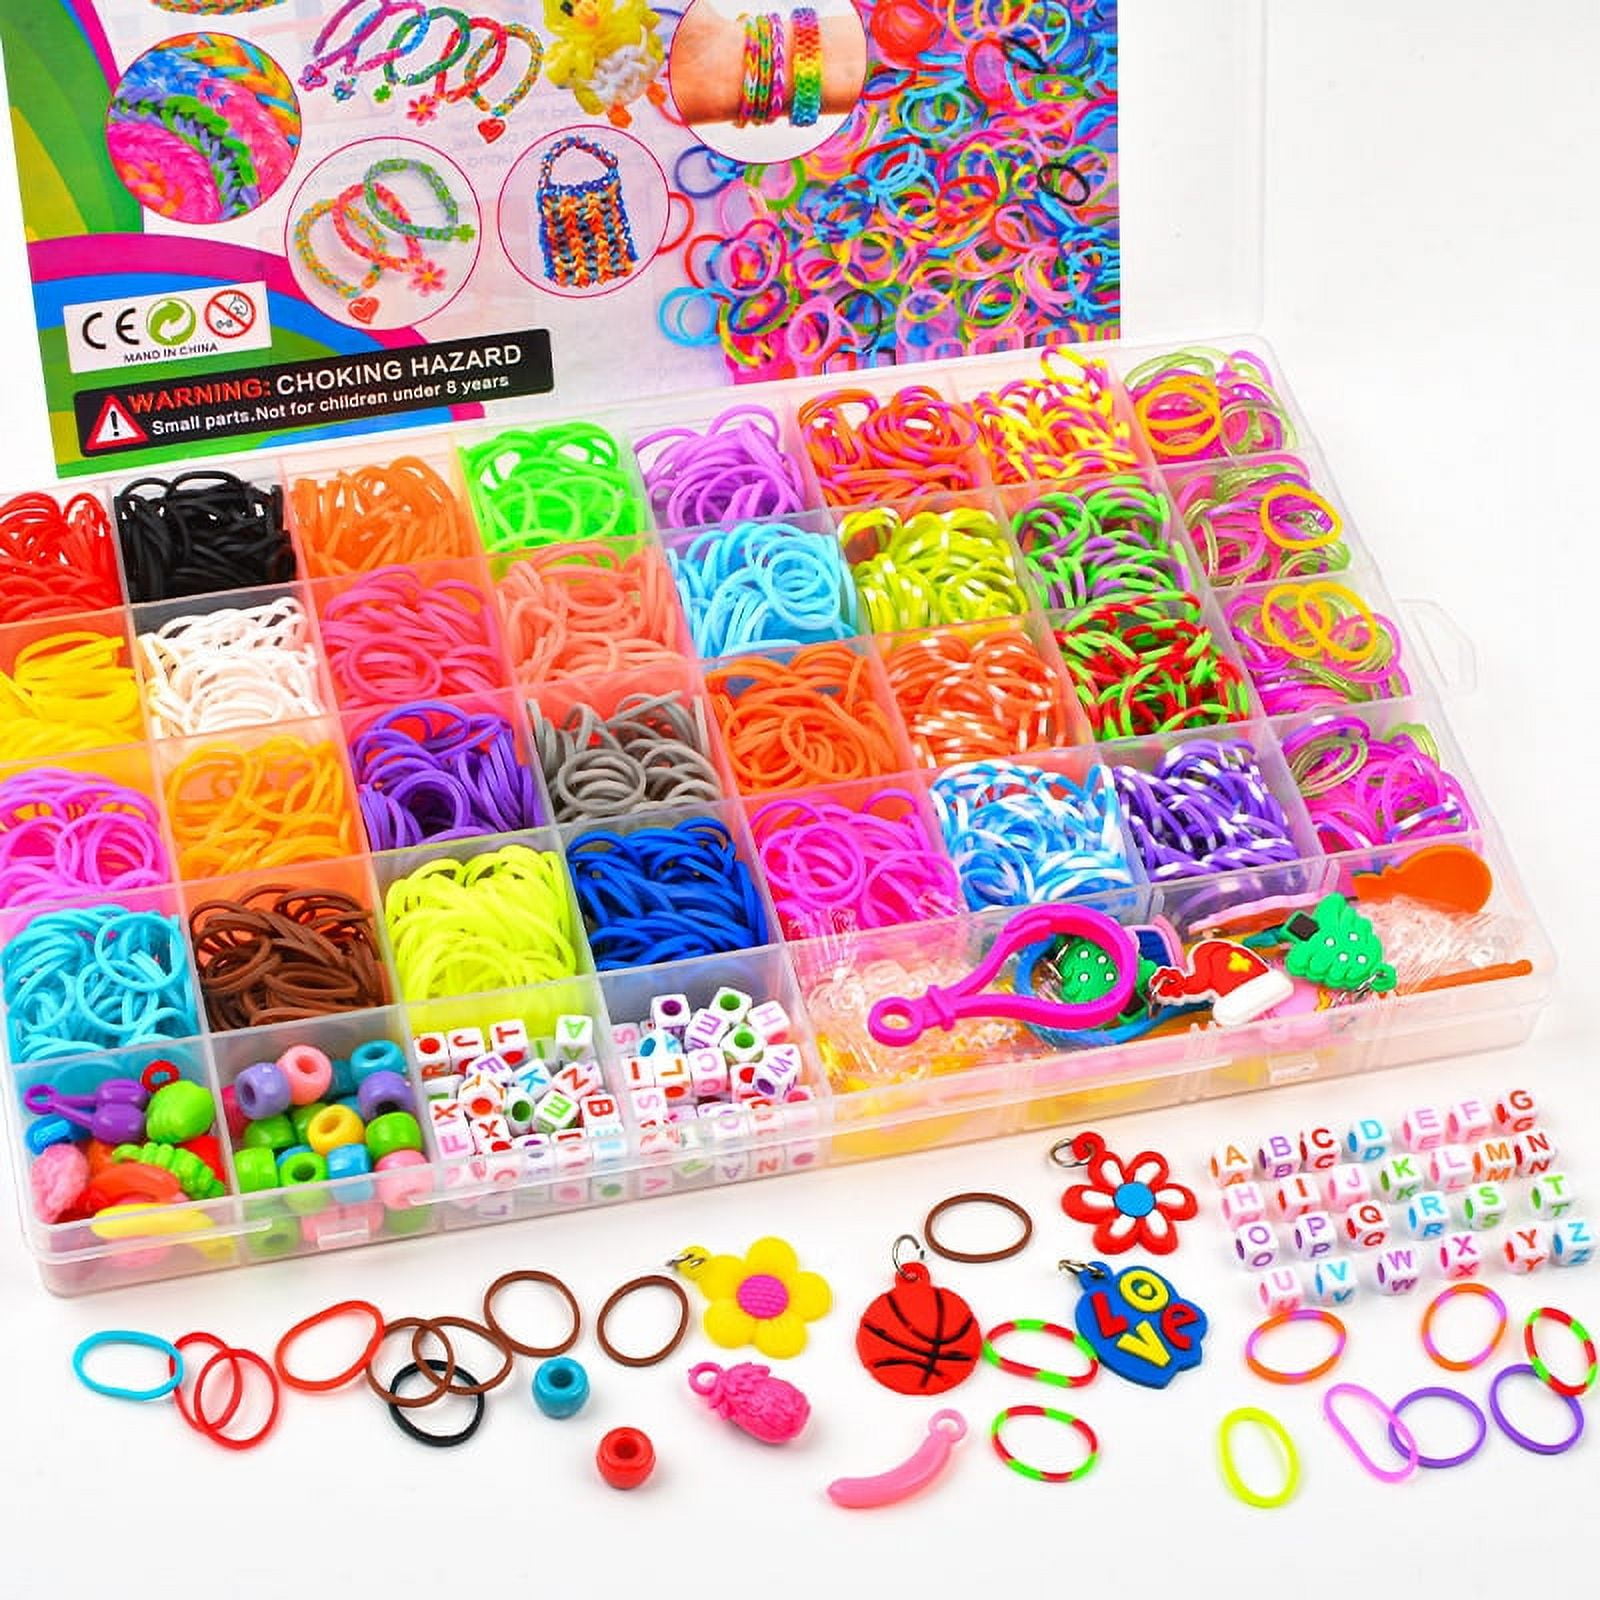 Gifts 8-10 Years Old Girls Rubber Band Loom Kits Kids Art, 59% OFF